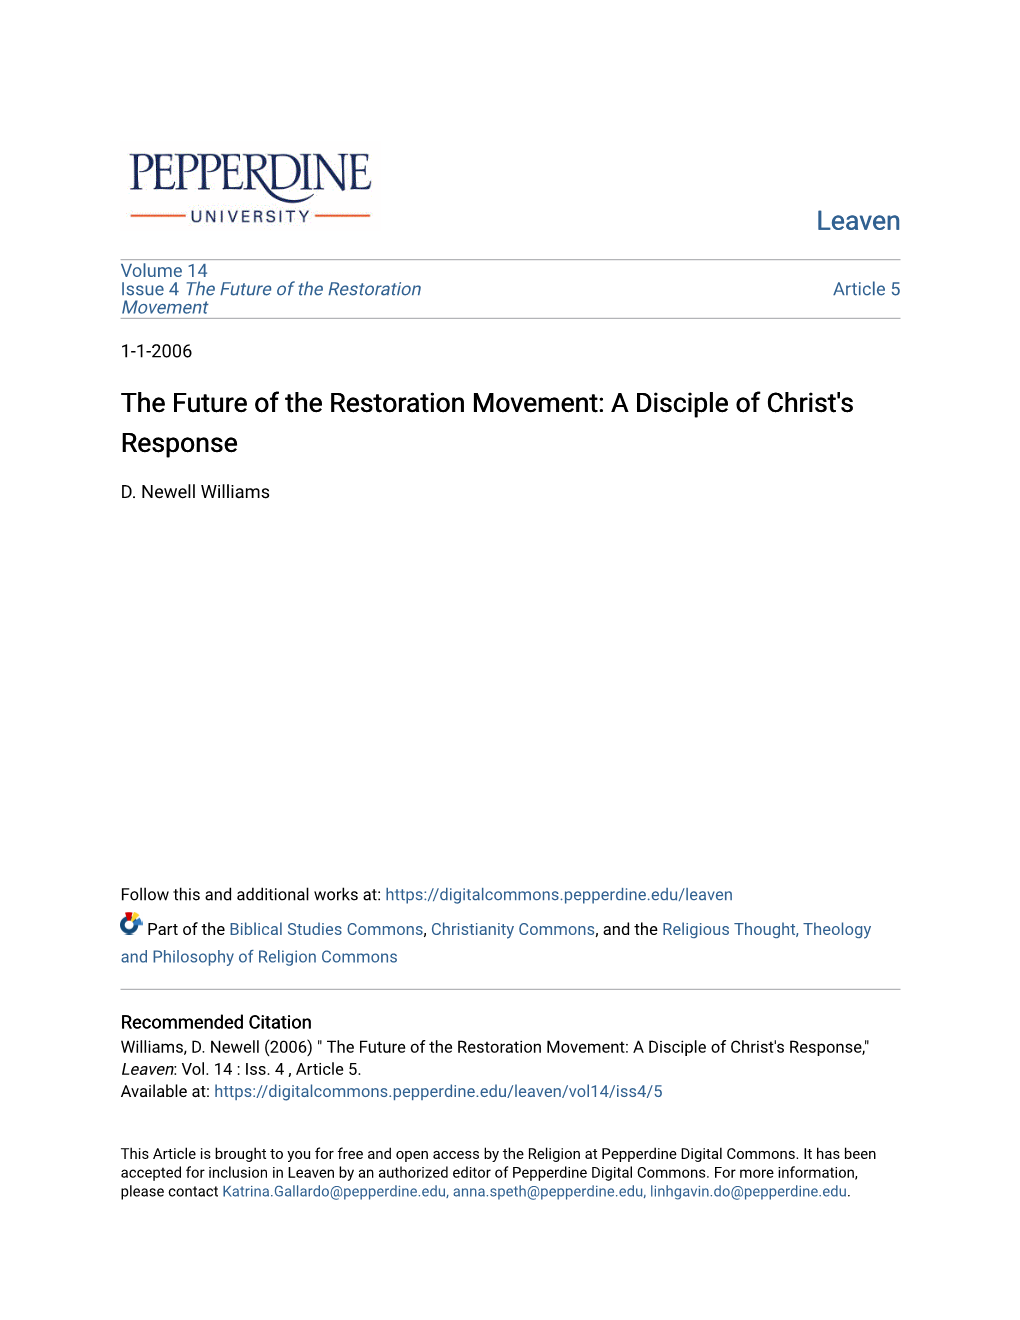 The Future of the Restoration Movement: a Disciple of Christ's Response